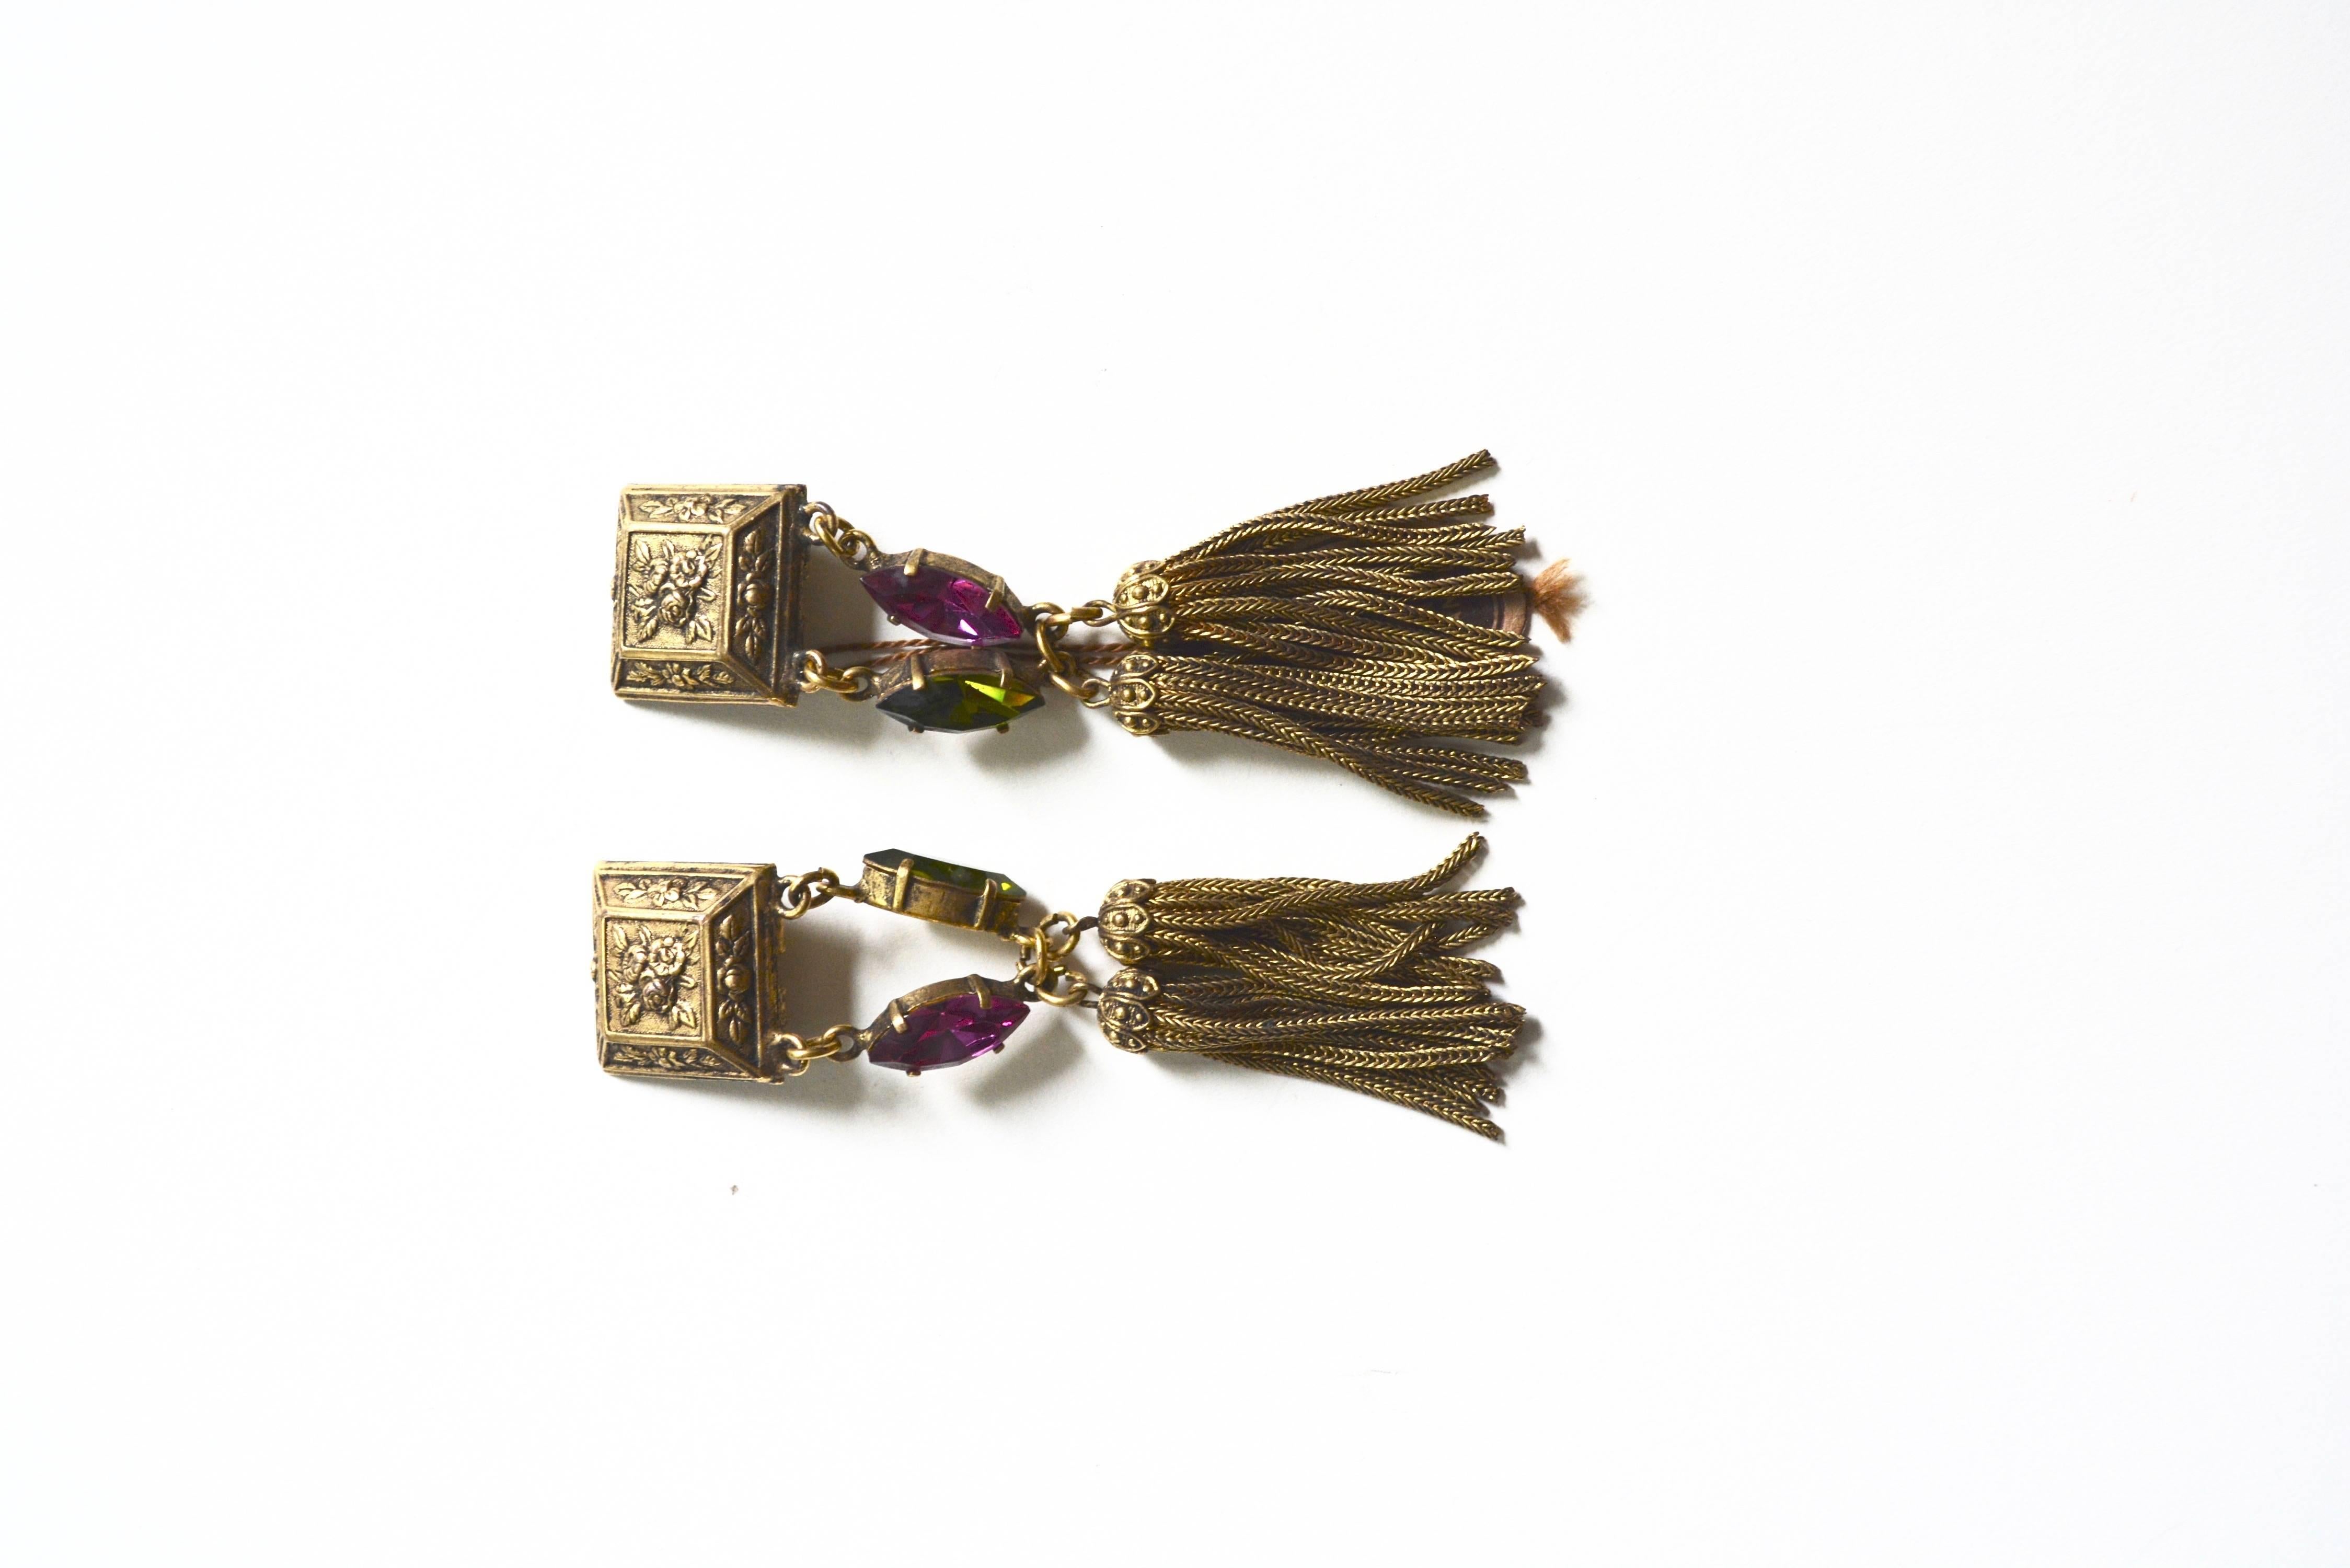 Lovely vibrant rhinestone French tassel earrings, circa 1960s. I had one other pair from the same former model's collection.  These feature a citrus green and pink color scheme. Condition is excellent. 3.2